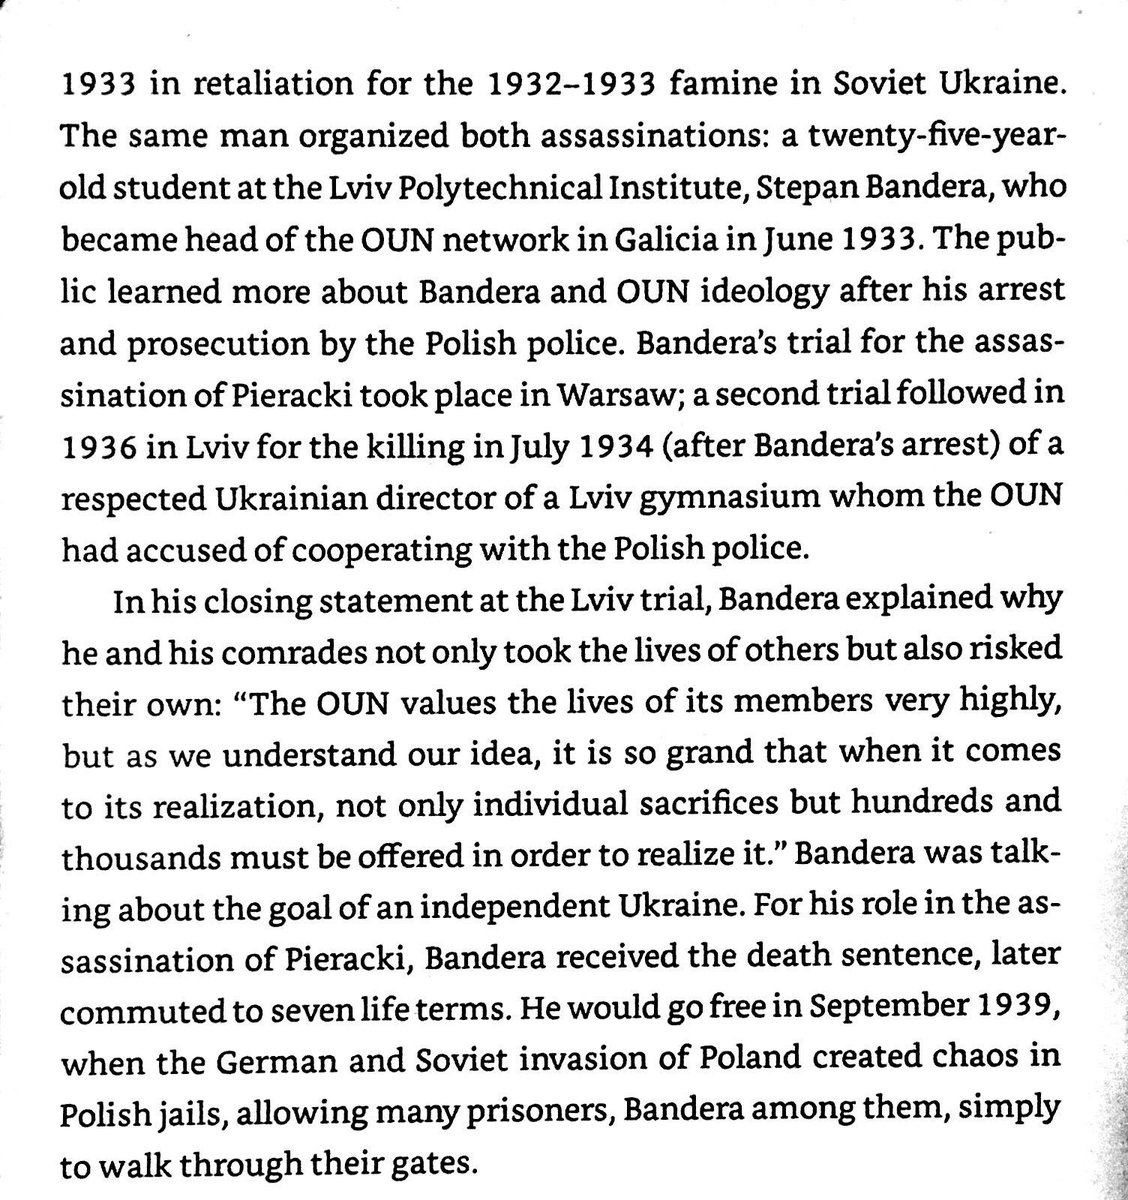 Early days of the Organization of Ukrainian Nationalists. A handful of assasasinations of politicians and diplomats made a big impression for a small group. Young Bandera sounds almost like James Mason.